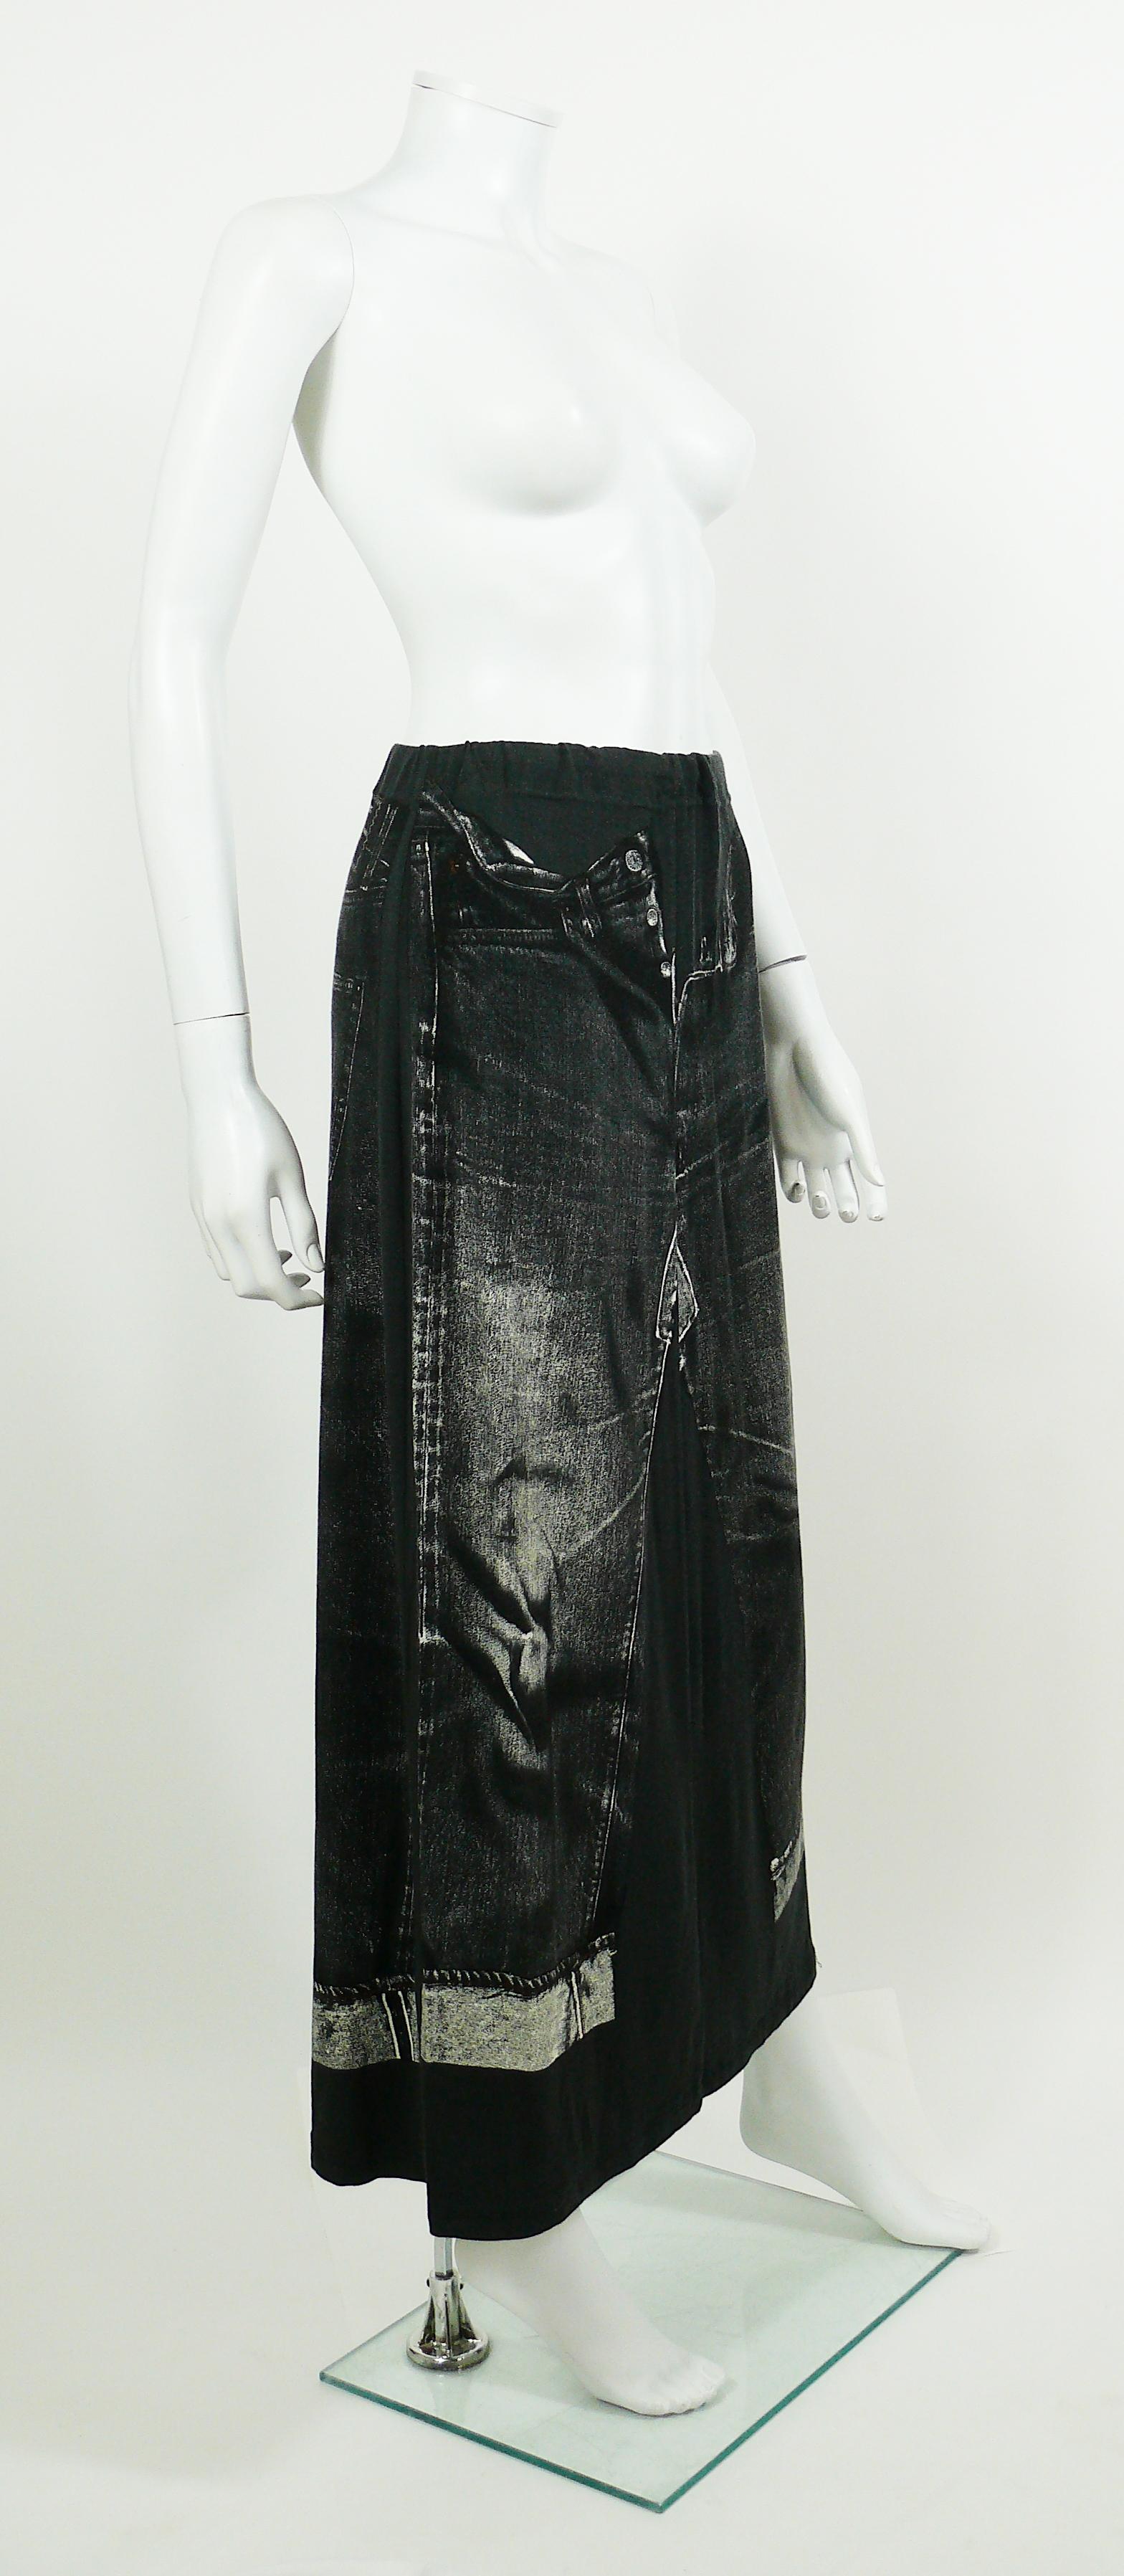 JEAN PAUL GAULTIER dark grey jersey maxi skirt featuring an X-RAY screen trompe l’œil jeans on front and back.

This skirt features :
- Dark grey jersey background featuring distressed black/white x-ray screen trompe l’œil jeans.
- Maxi length.
-